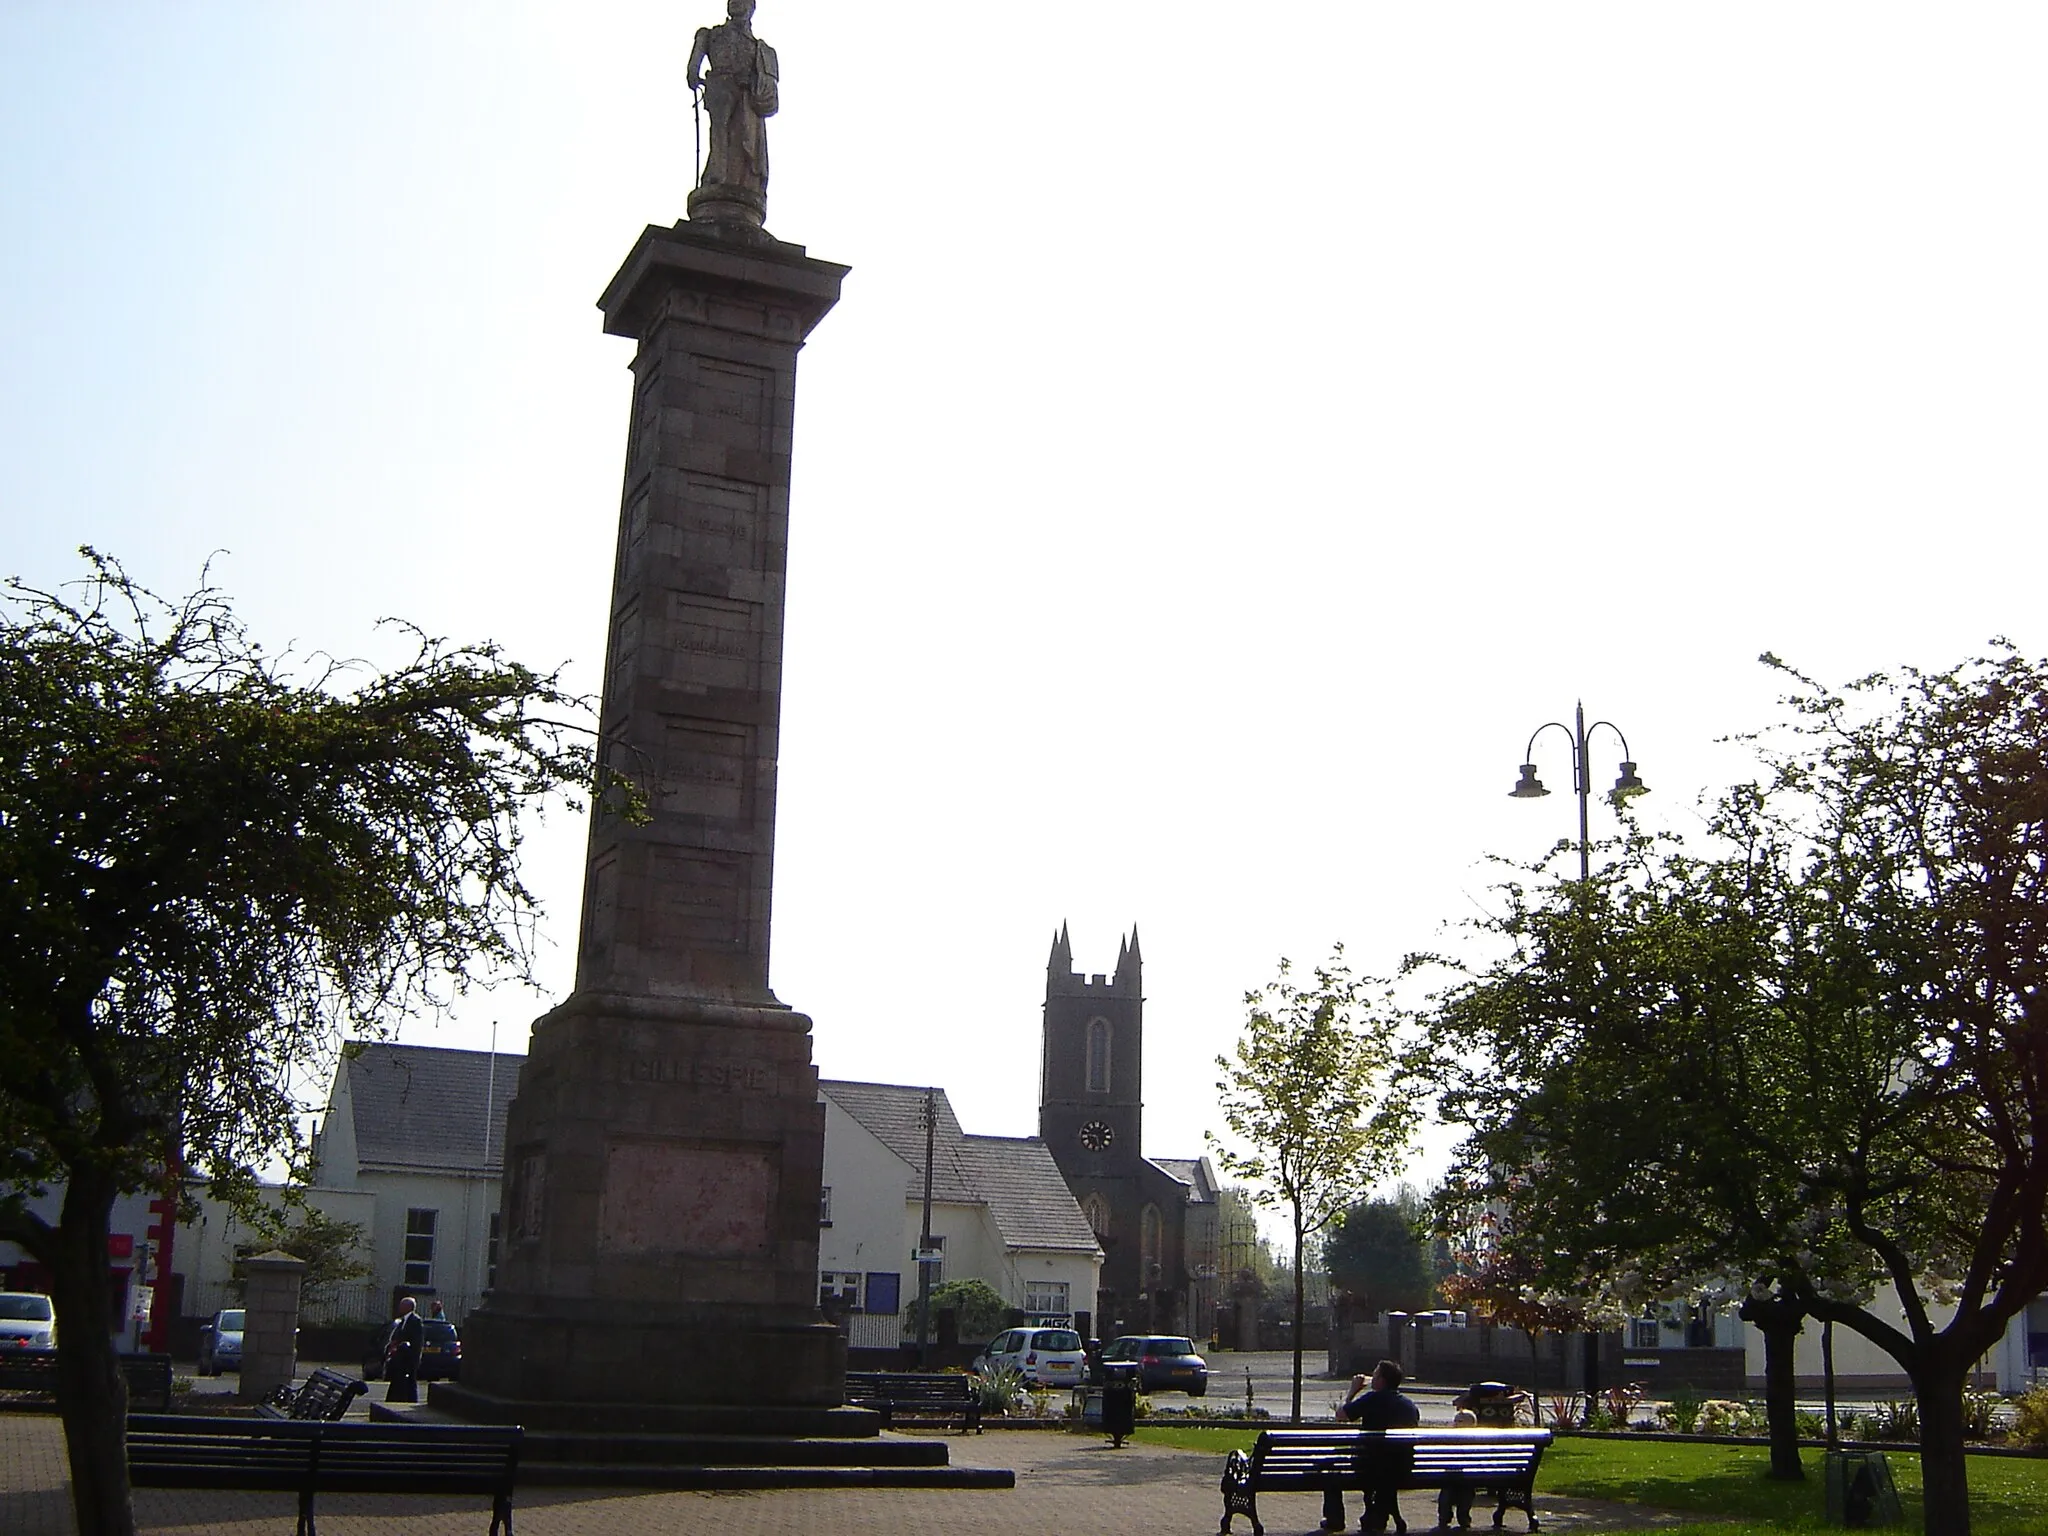 Photo showing: The Square of Comber, Co. Down, with the Statue of Gillespie, and the Parish Church.